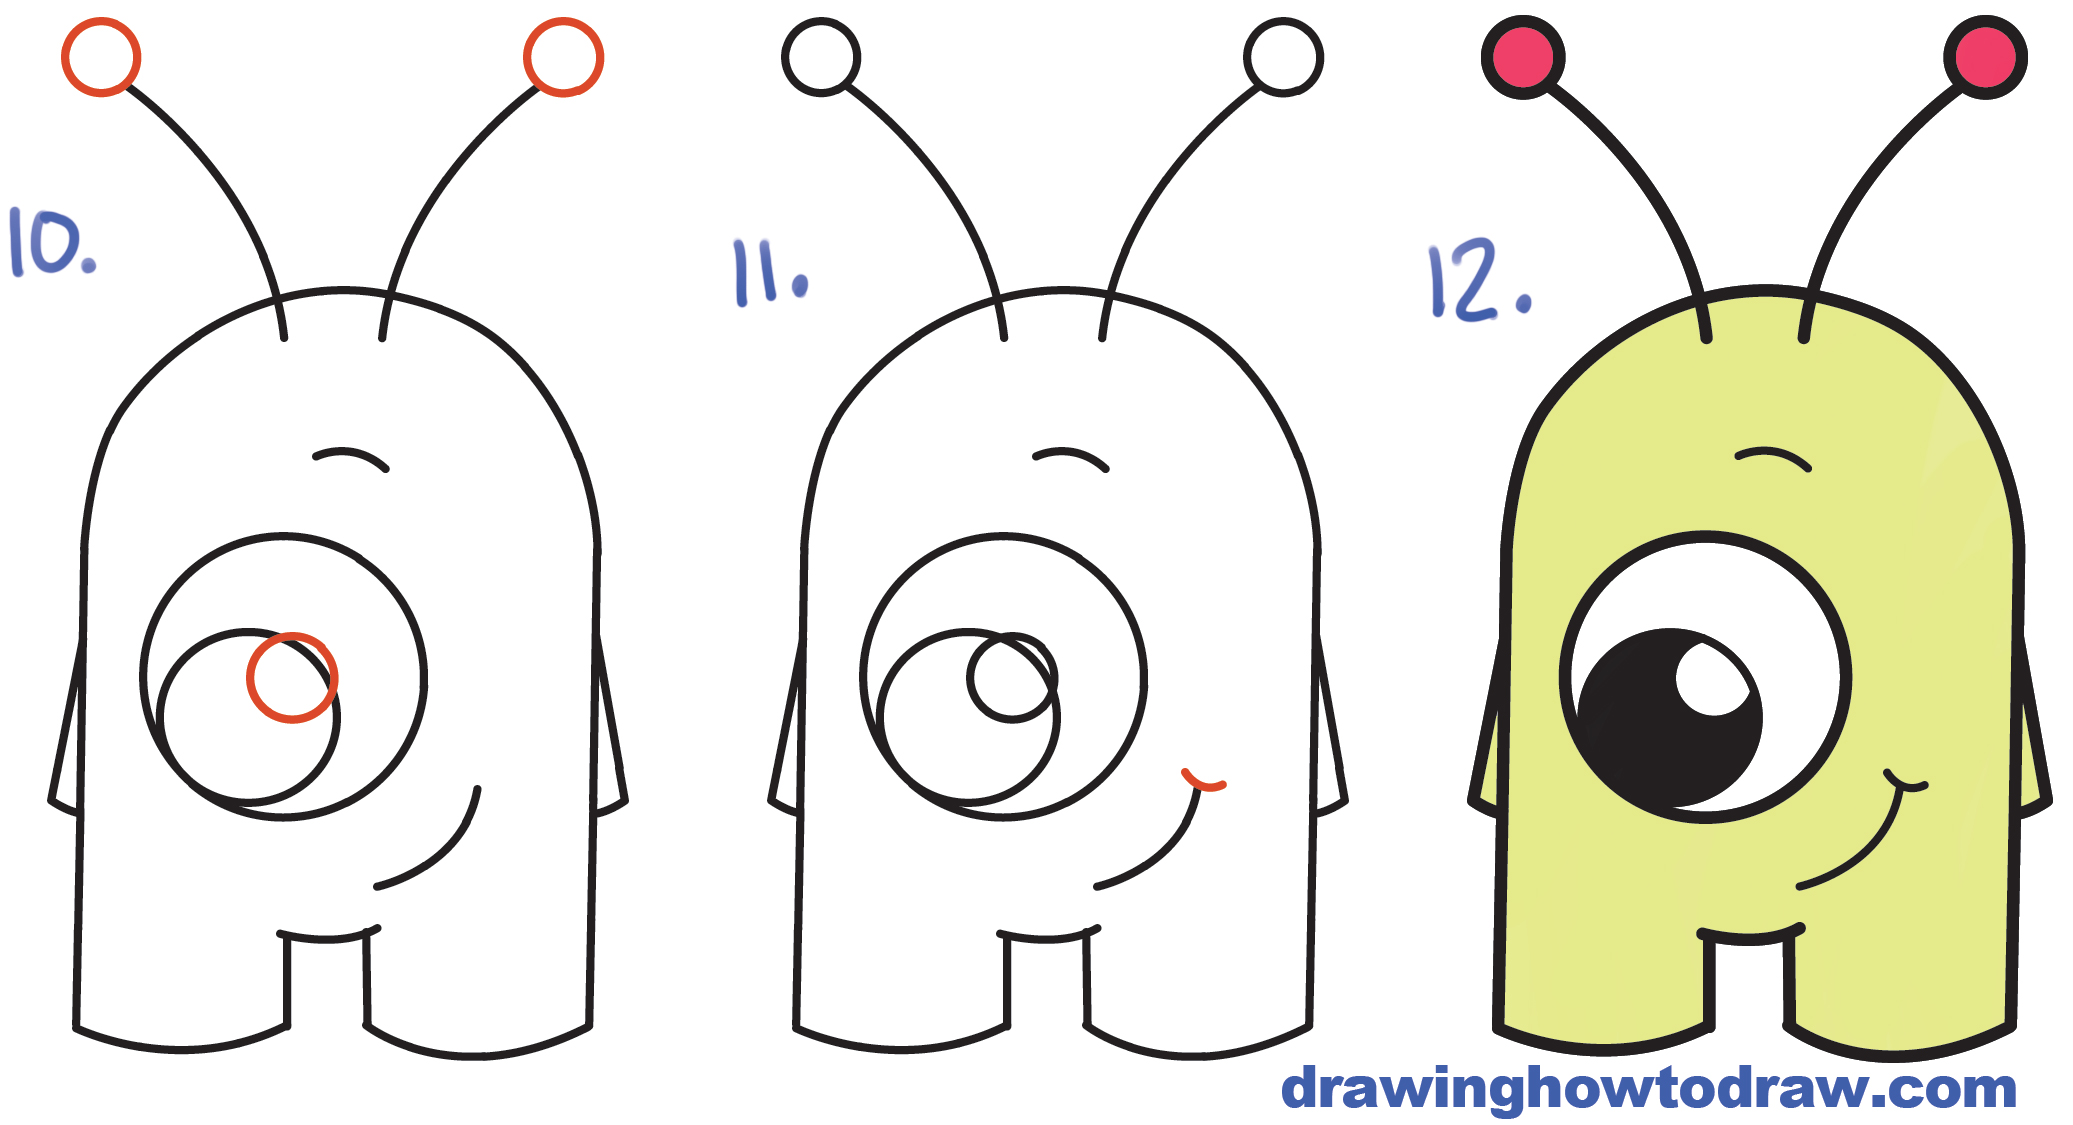 Fun and Easy Alien UFO Drawing Tutorial for Kids